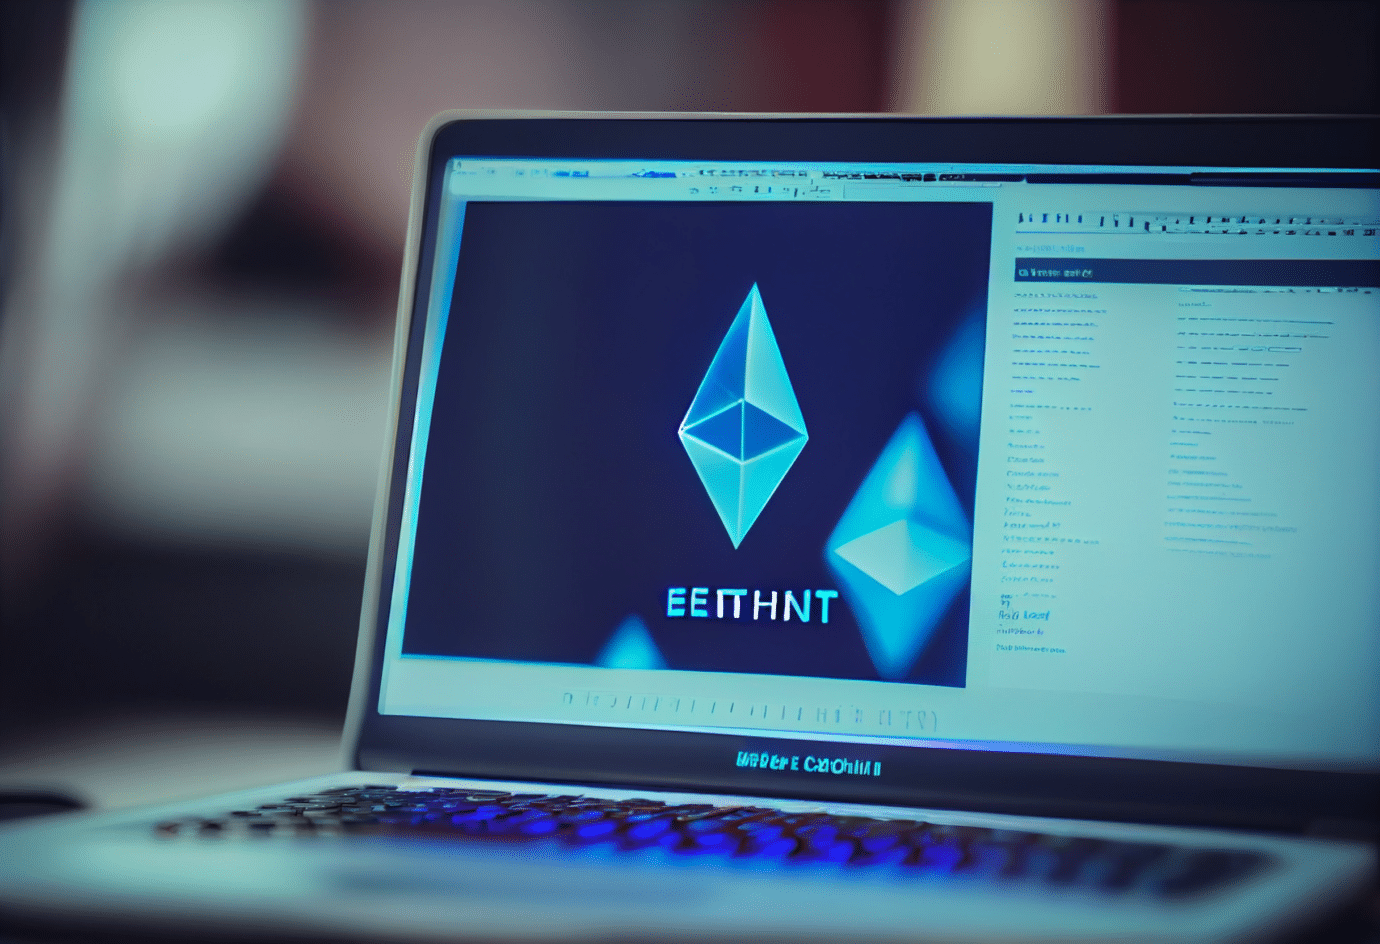 Ethereum’s account abstraction explained